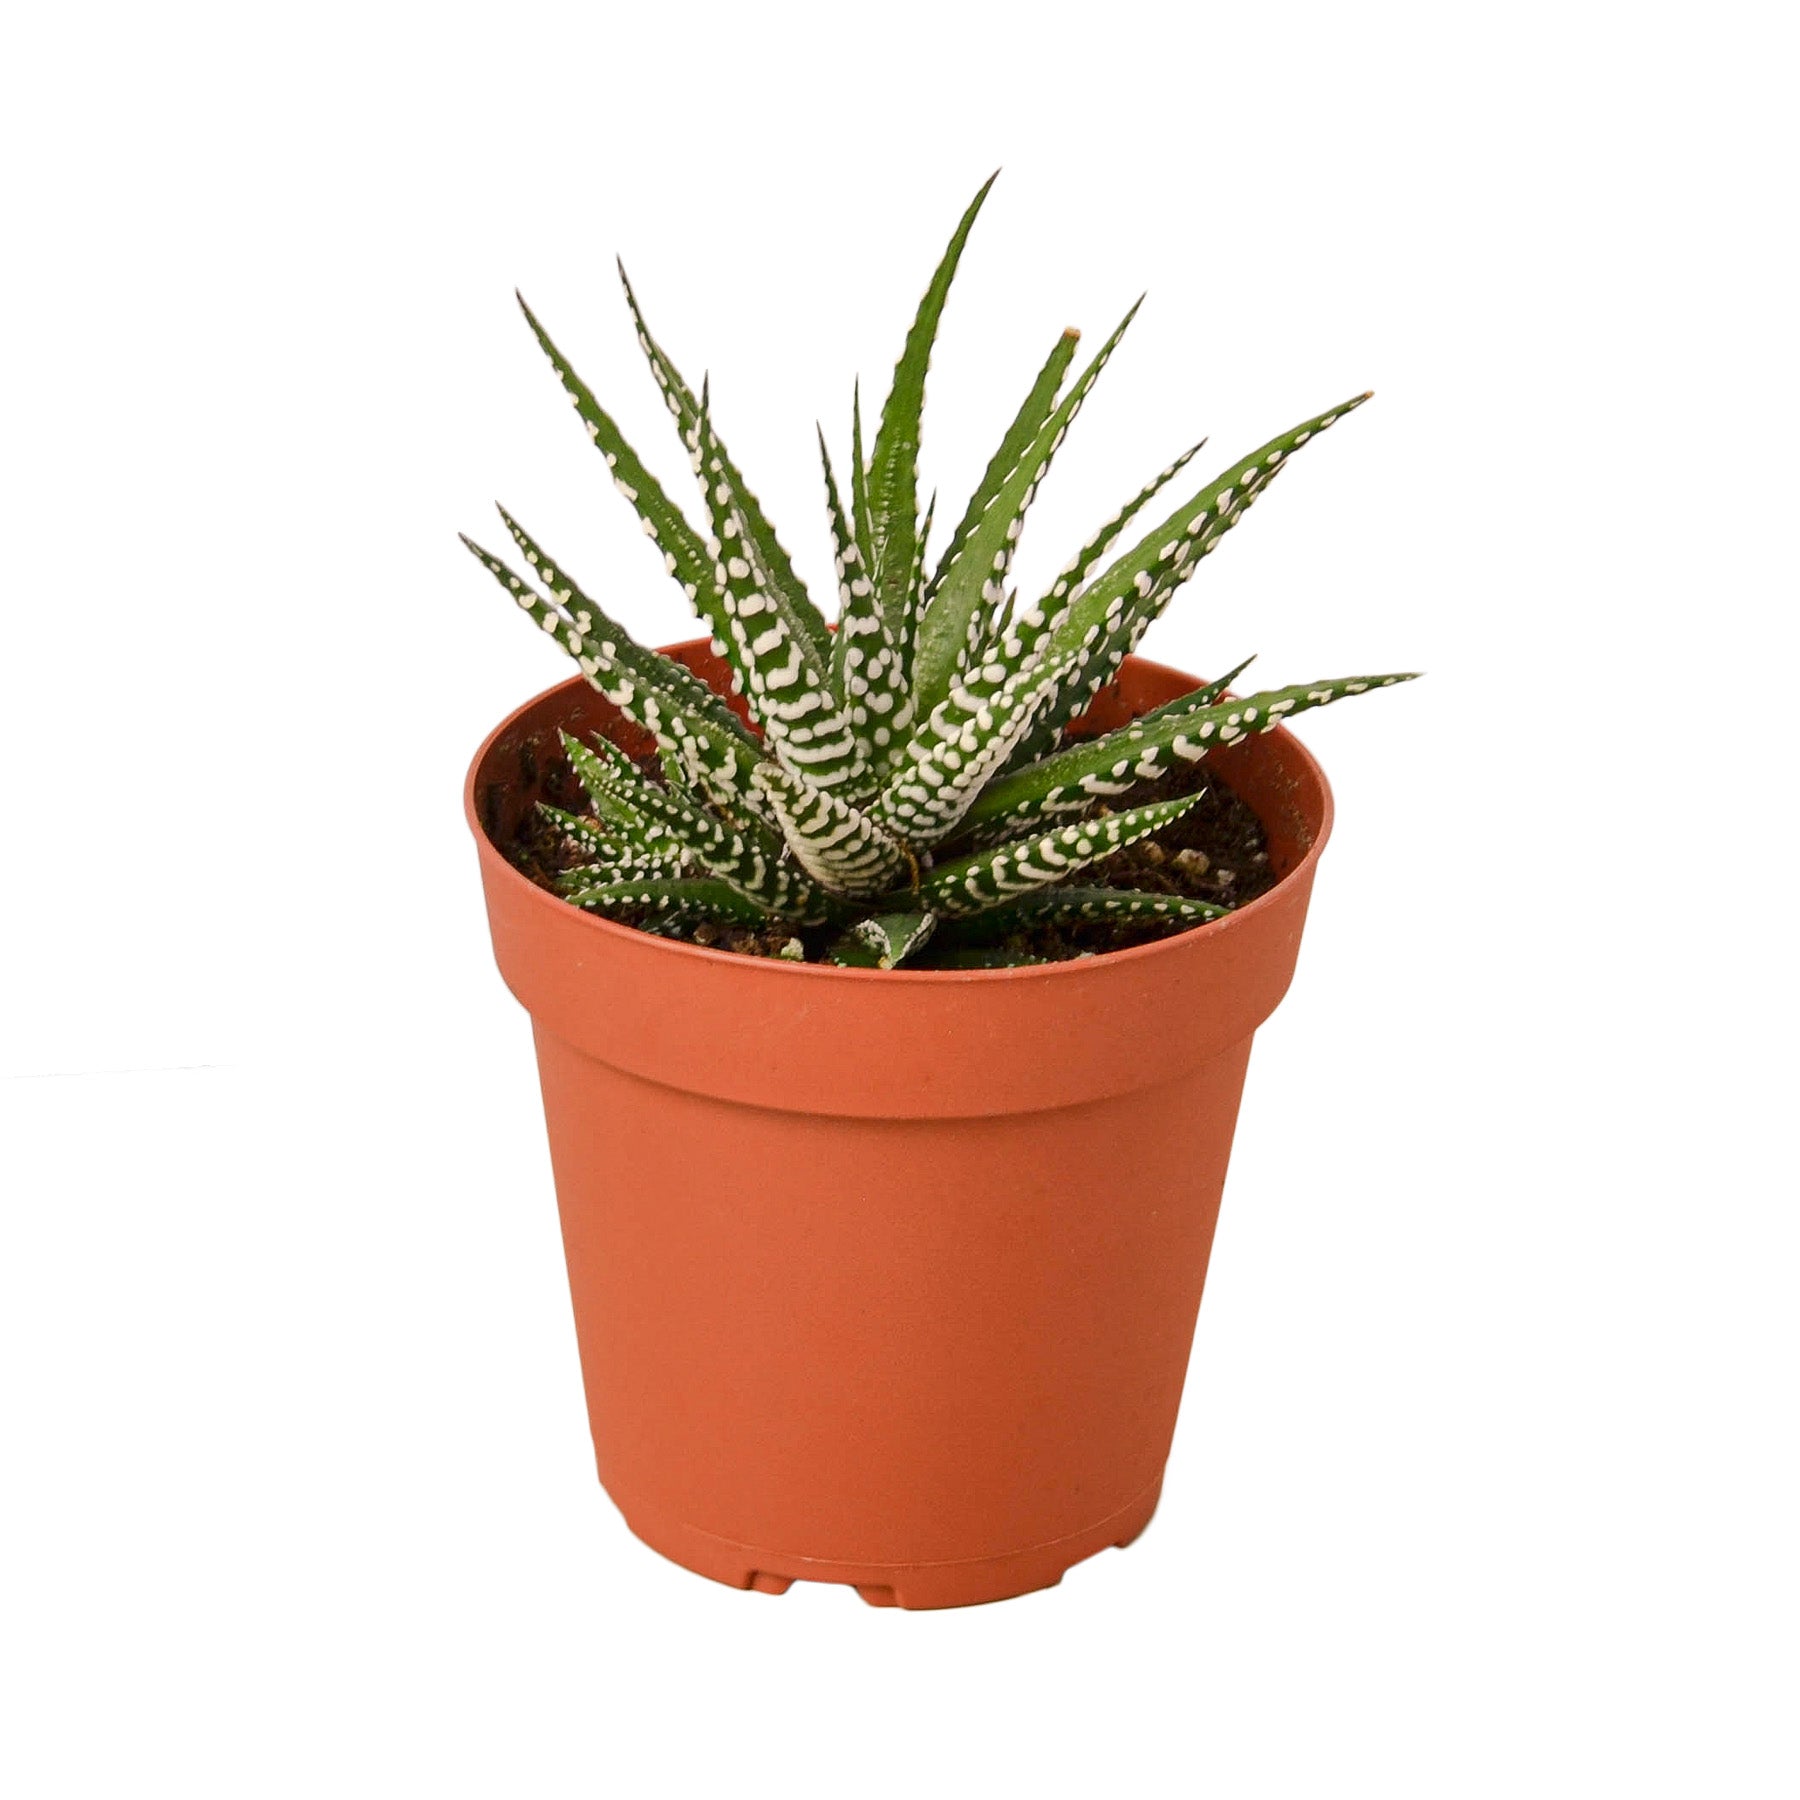 Aloe vera plant in a pot on a white background from the best plant nursery near me.